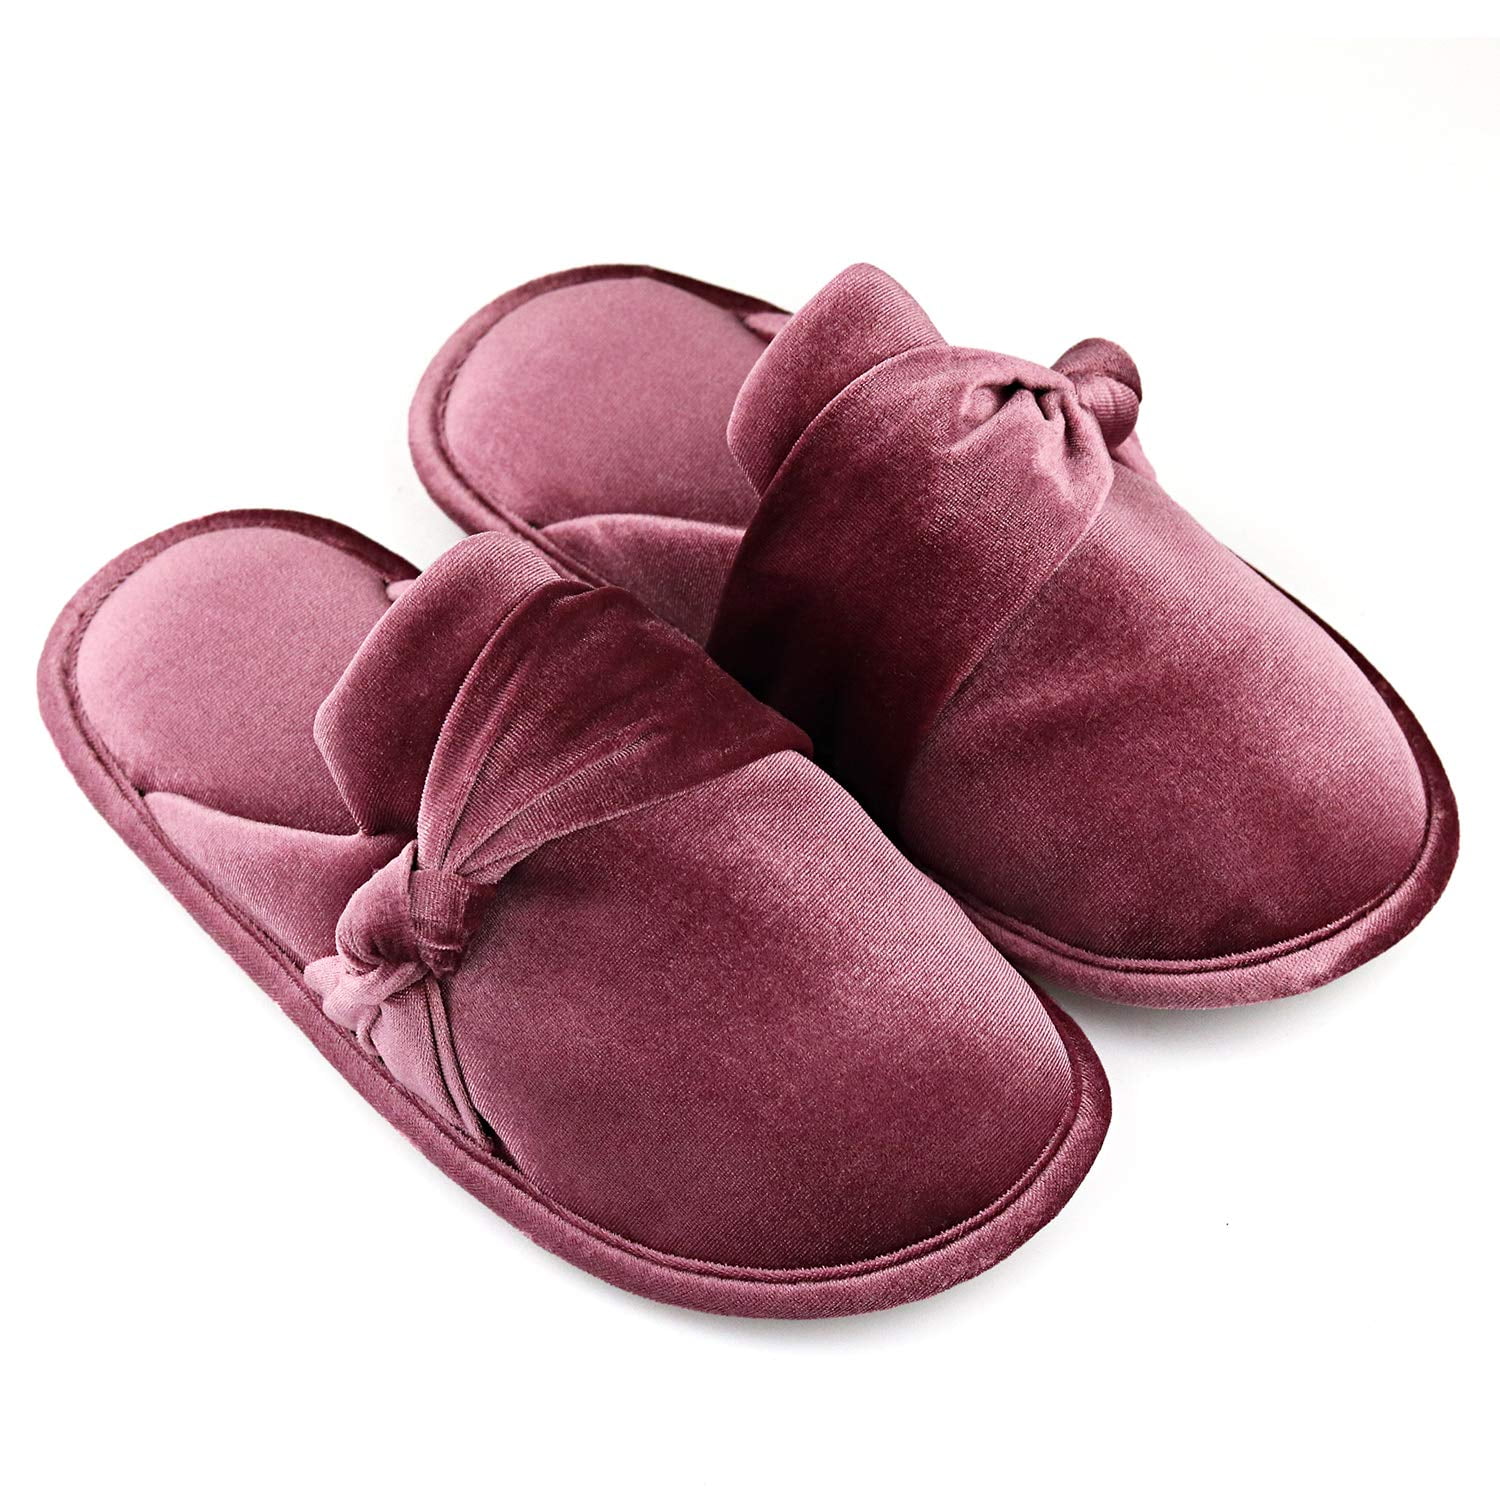 Ladies Bedroom Slippers Cheaper Than Retail Price Buy Clothing 